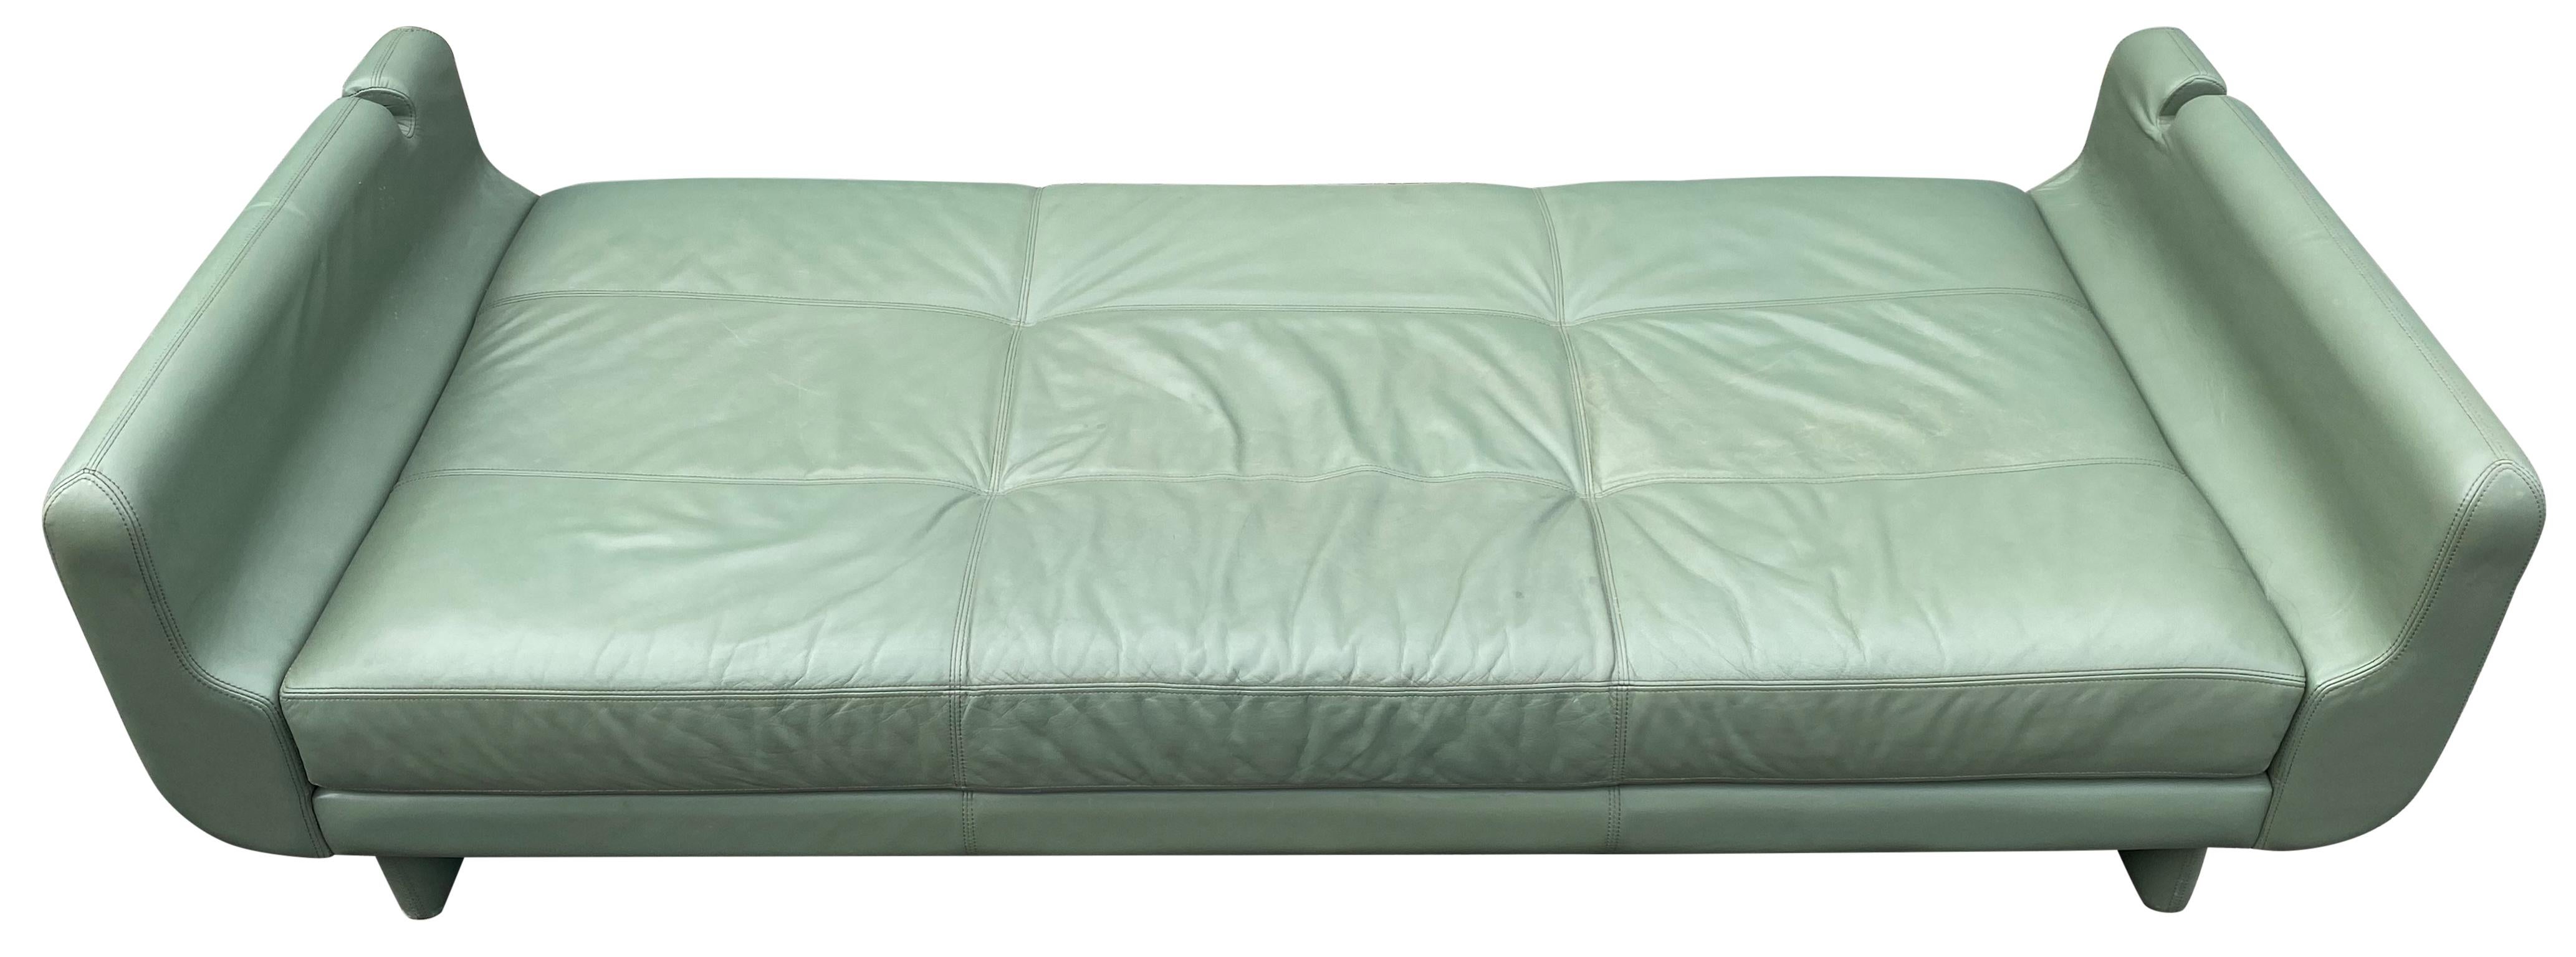 Beautiful Leather Matinee Daybed Sofa by Vladimir Kagan Sage Green Leather 2